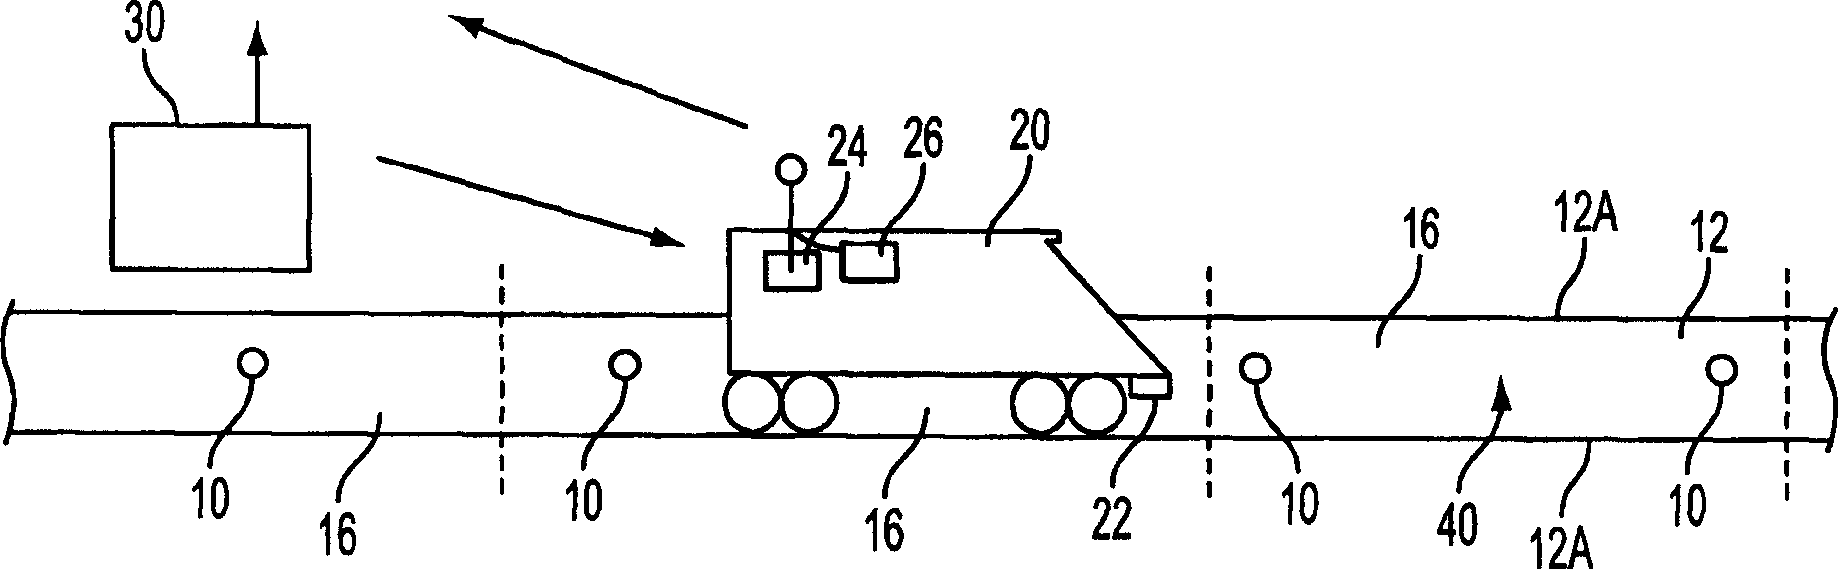 Rolling stock control system and method by device along route